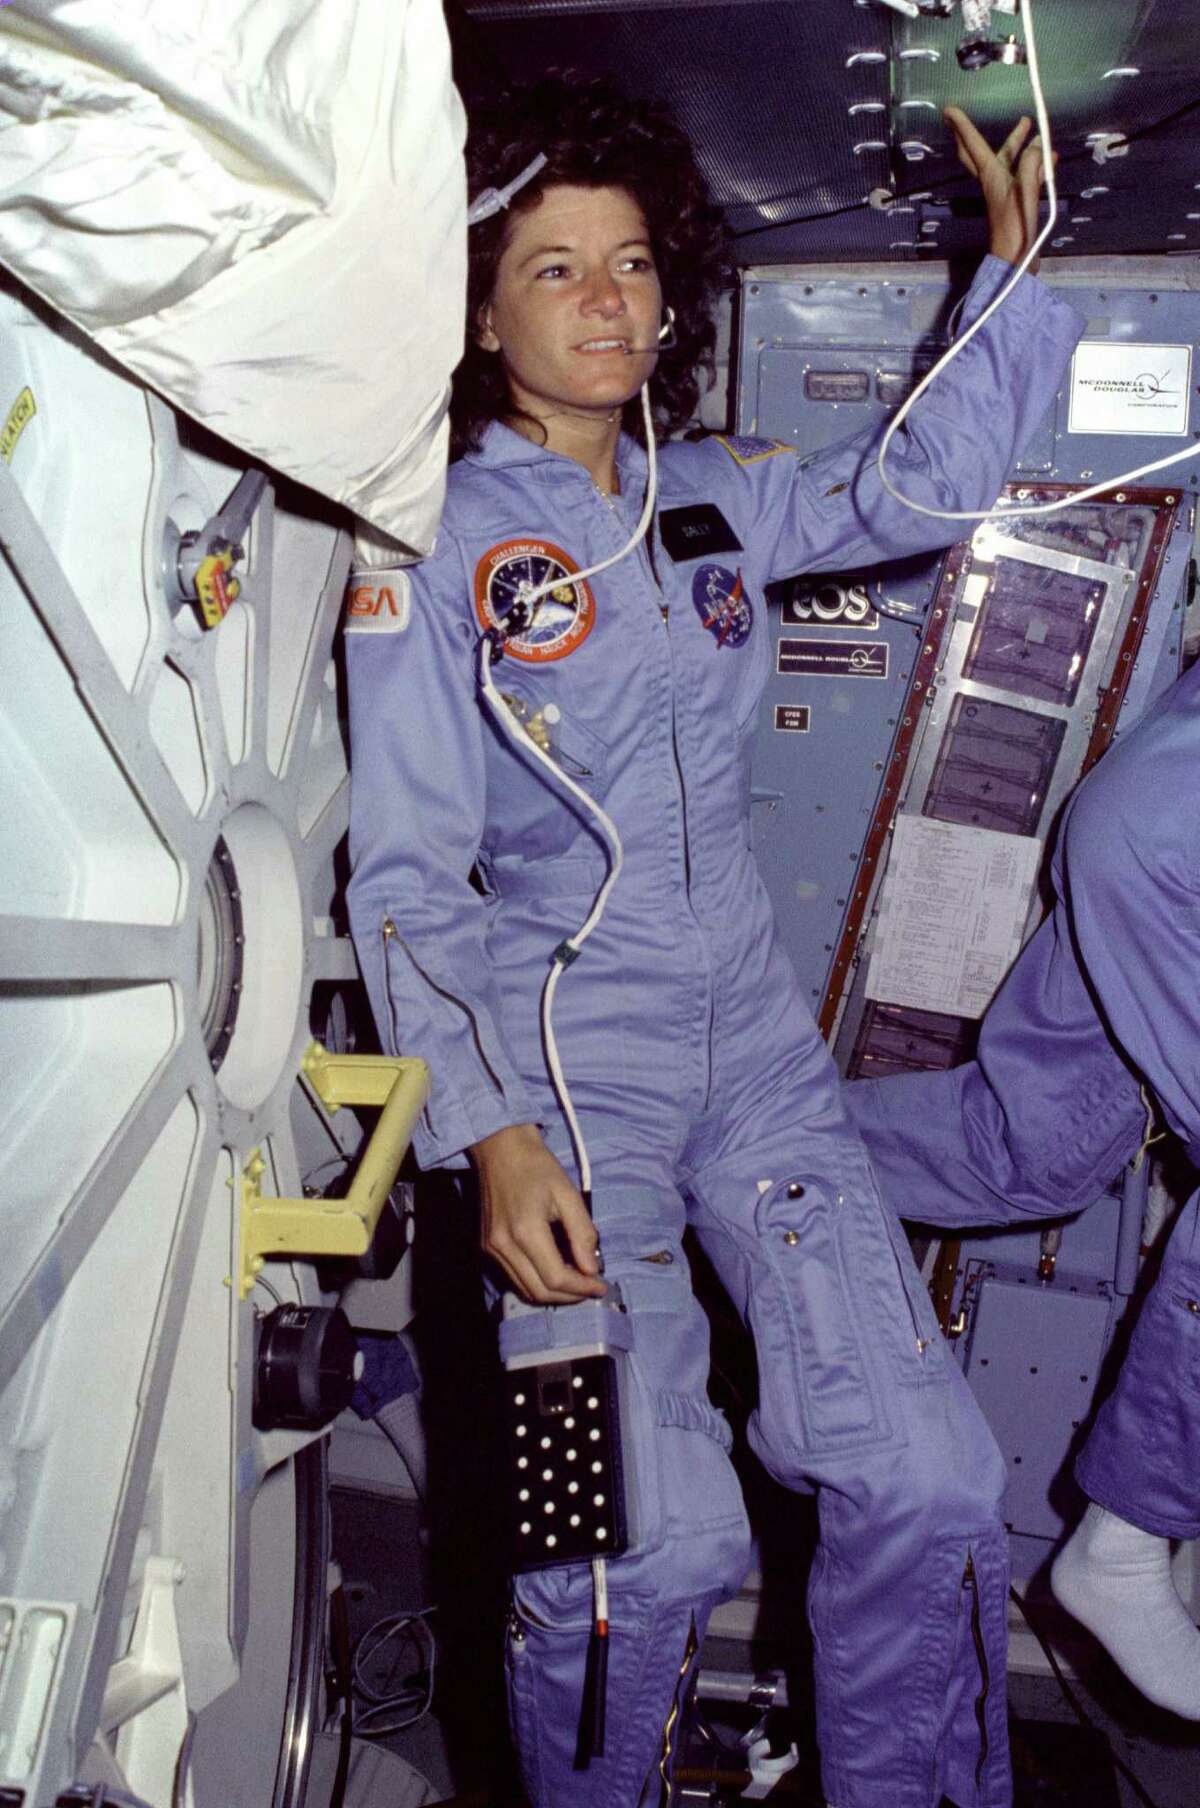 When the shuttle Challenger landed in 1983, Sally Ride told reporters, "I'm sure it was the most fun that I'll ever have in my life."